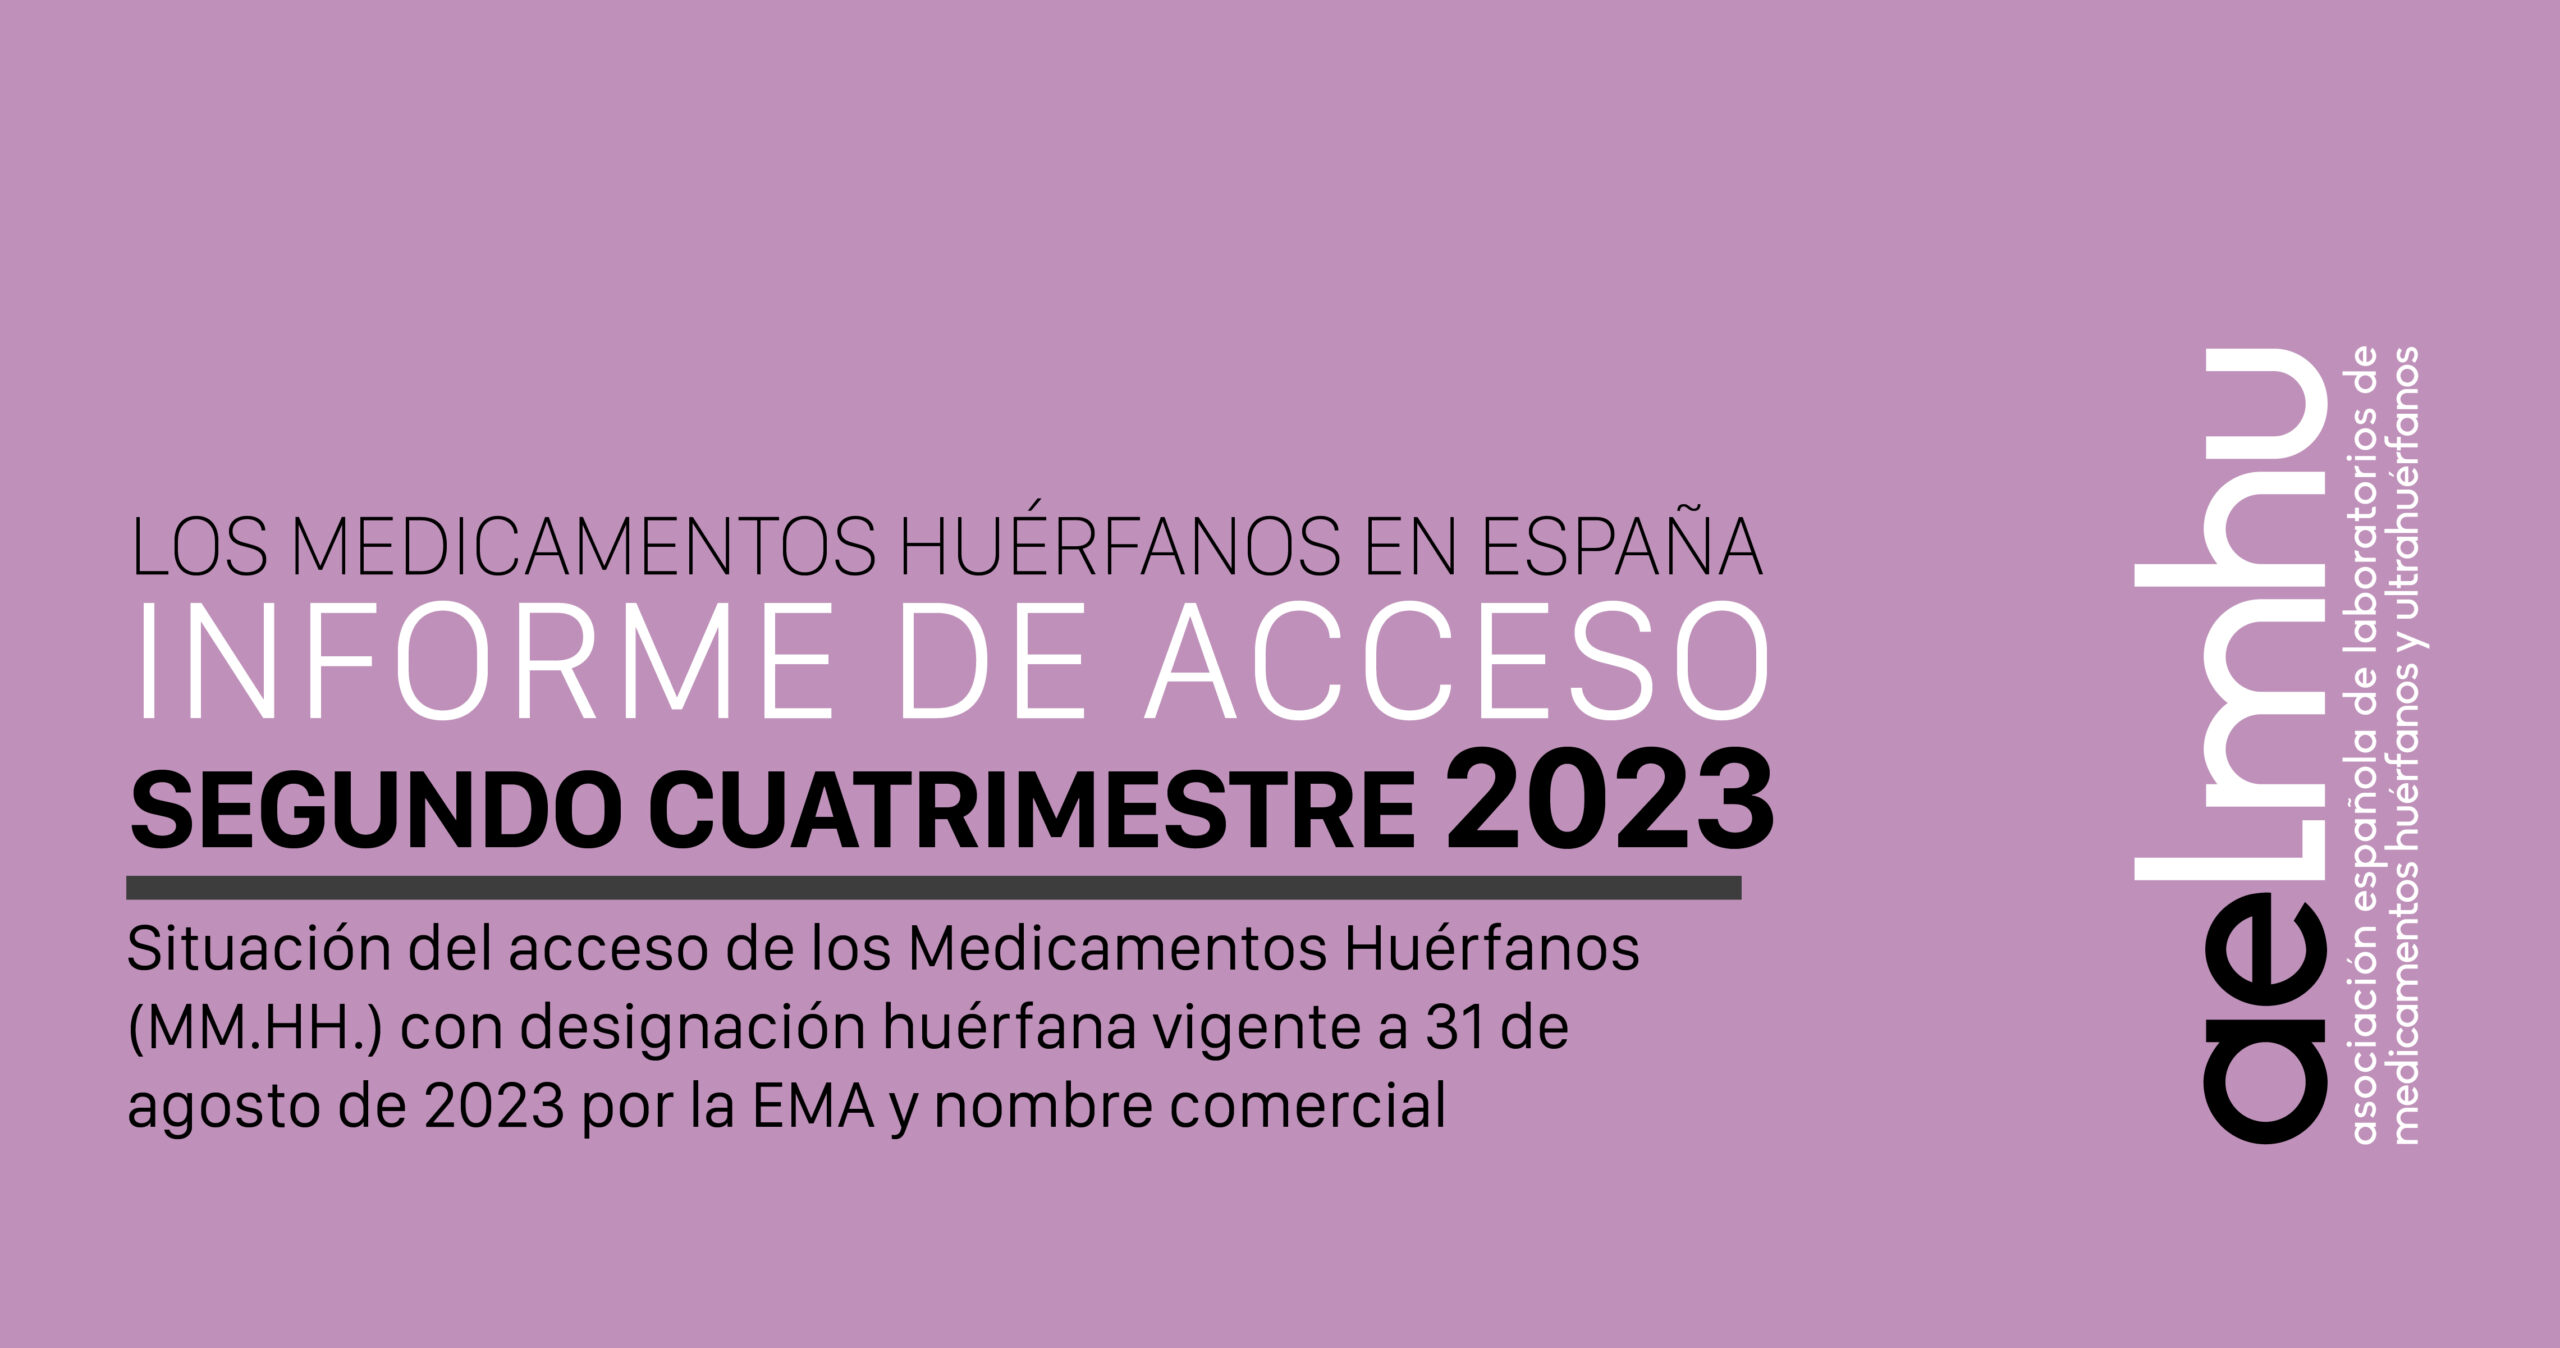 Second quarterly report on access to orphan drugs in 2023